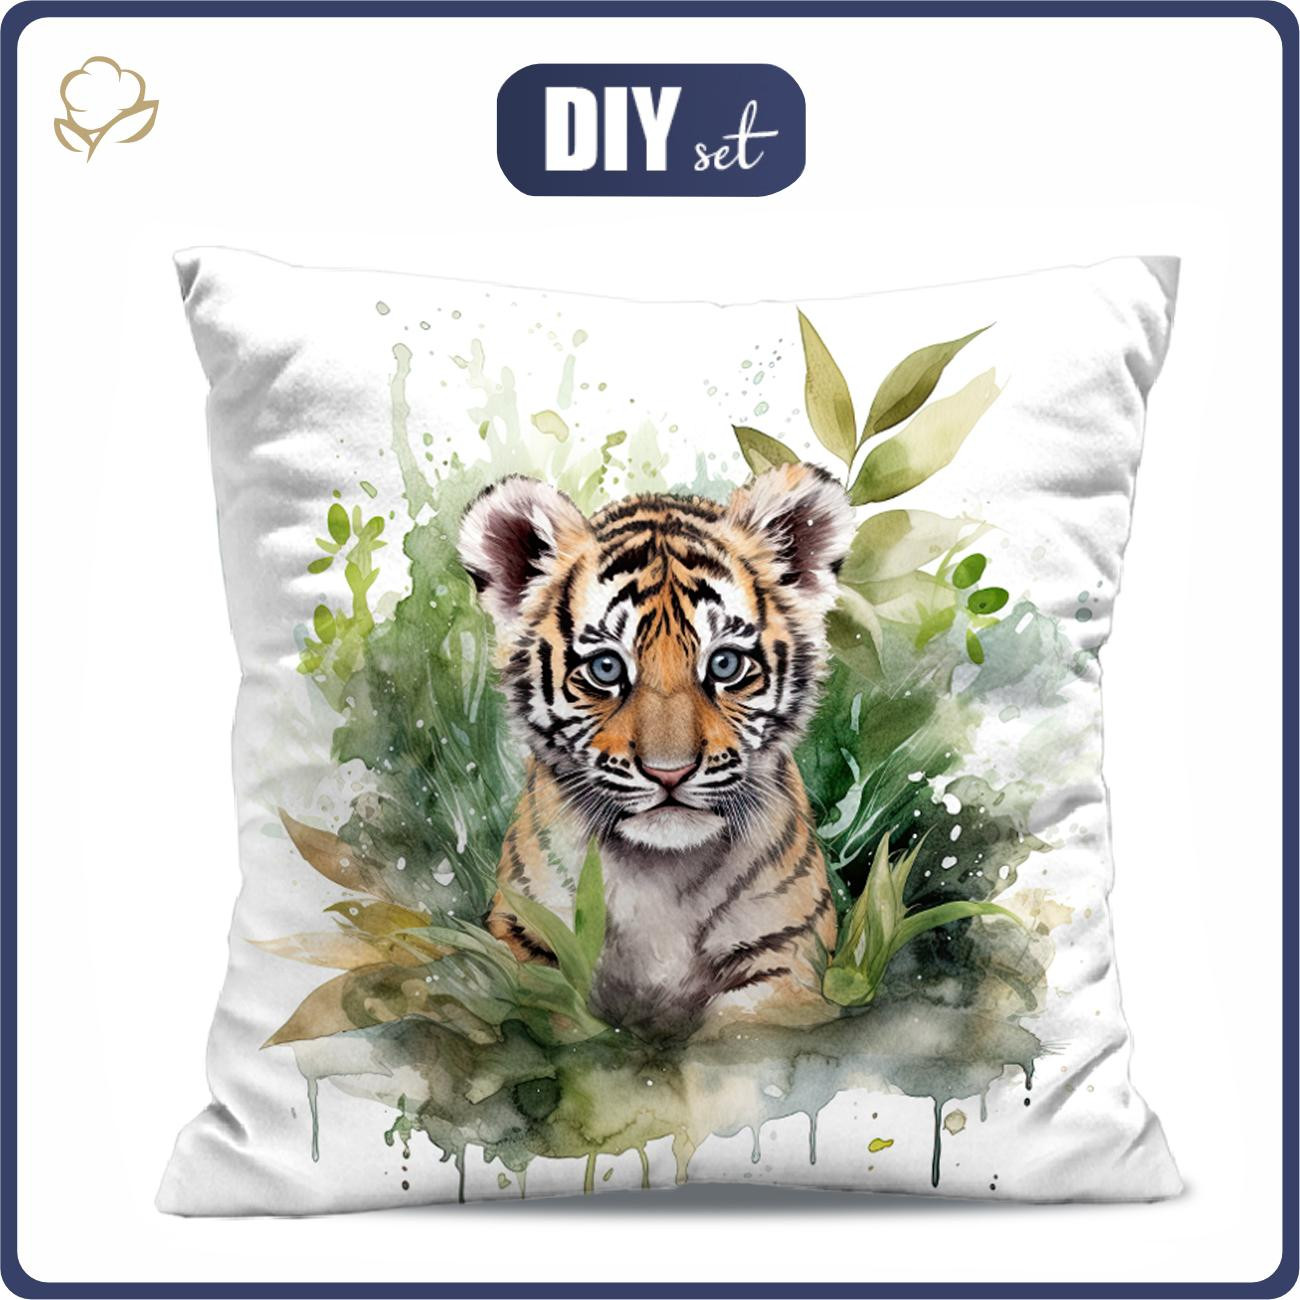 PILLOW 45X45 - WATERCOLOR TIGER - sewing set - Pillow 45x45 - Home